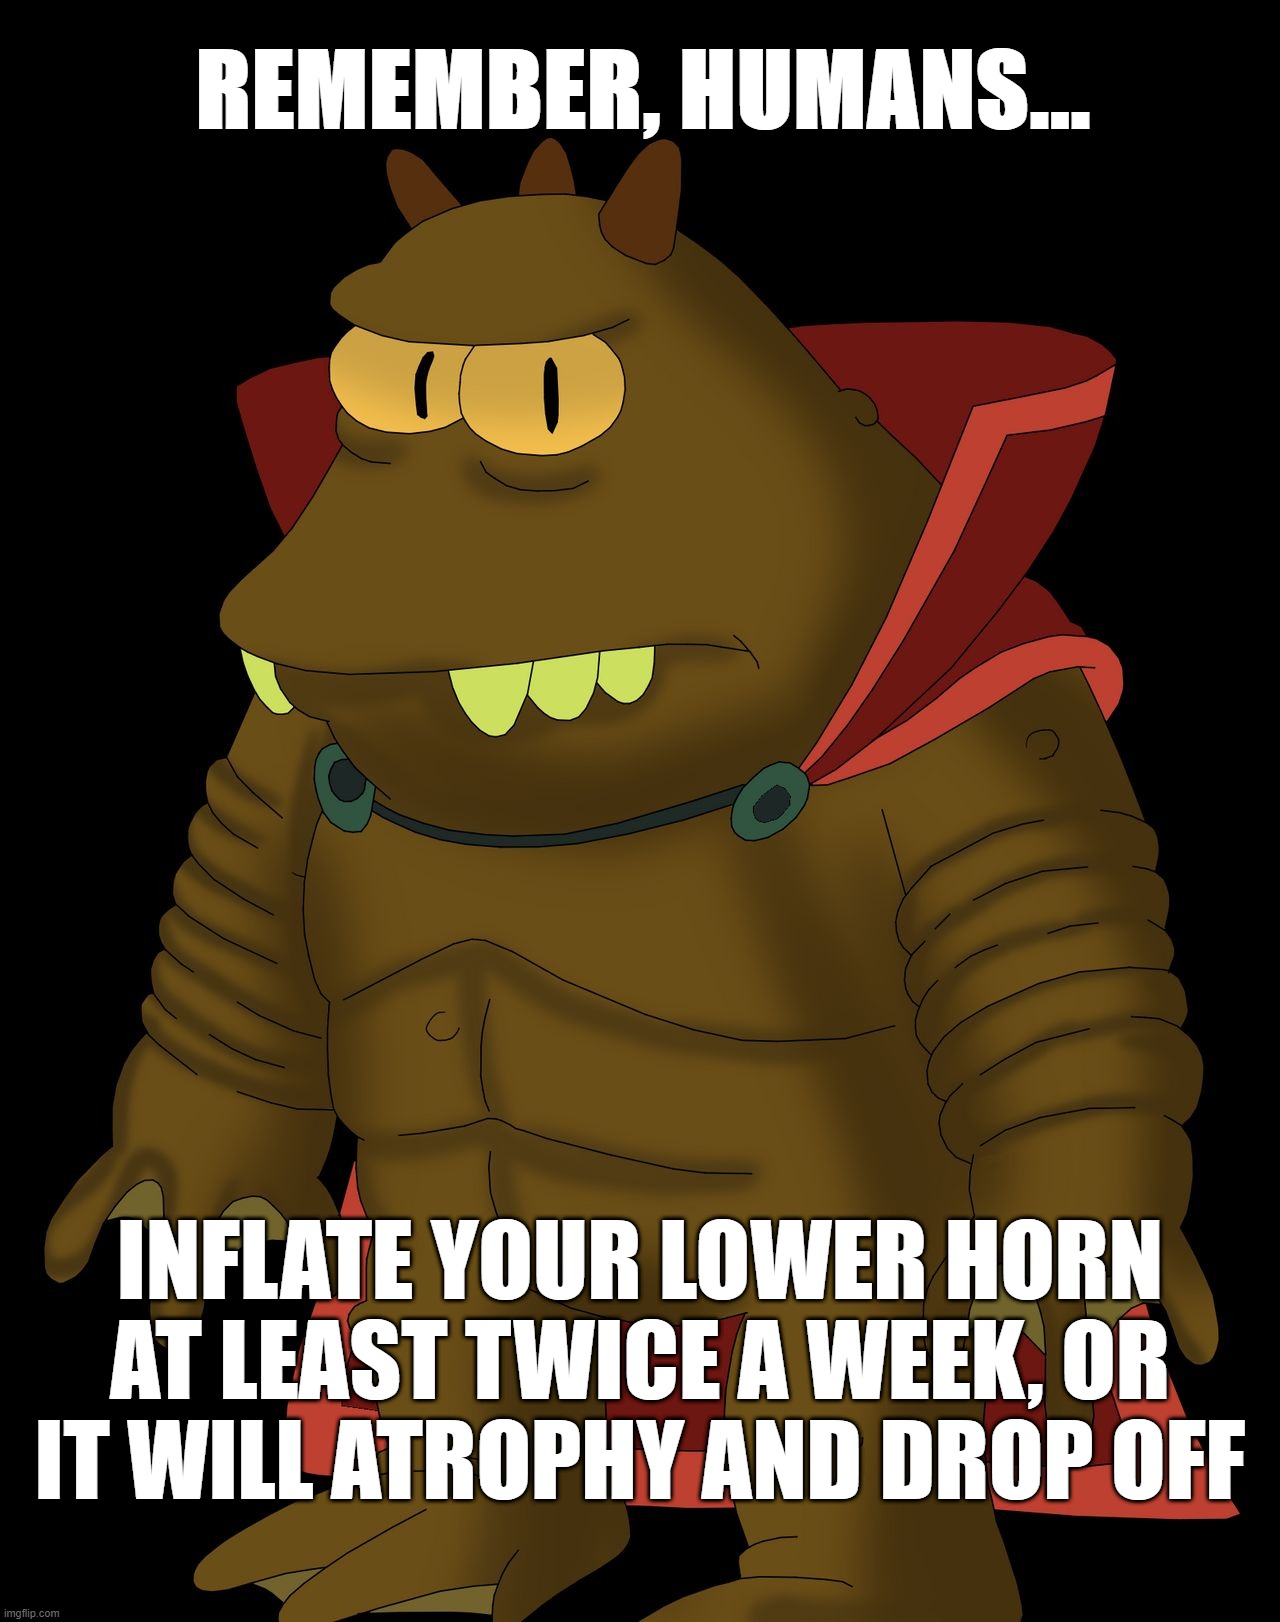 LOWER HORN | REMEMBER, HUMANS... INFLATE YOUR LOWER HORN AT LEAST TWICE A WEEK, OR IT WILL ATROPHY AND DROP OFF | image tagged in lrrr,simpsons,lower horn,psa | made w/ Imgflip meme maker